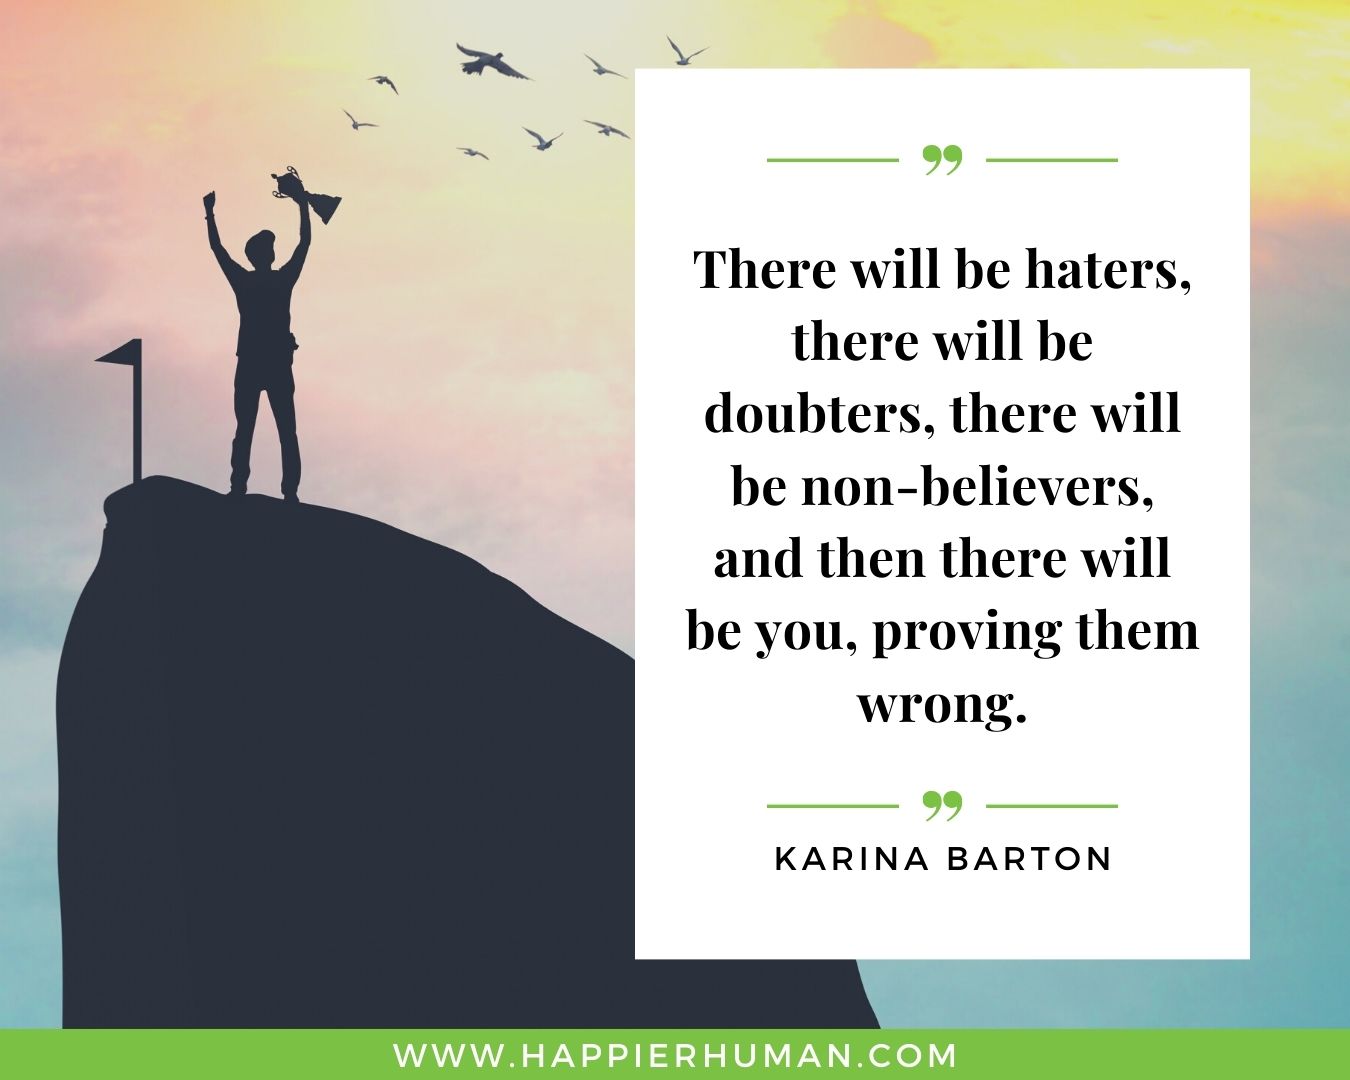 Haters Quotes - “There will be haters, there will be doubters, there will be non-believers, and then there will be you, proving them wrong.” - Karina Barton